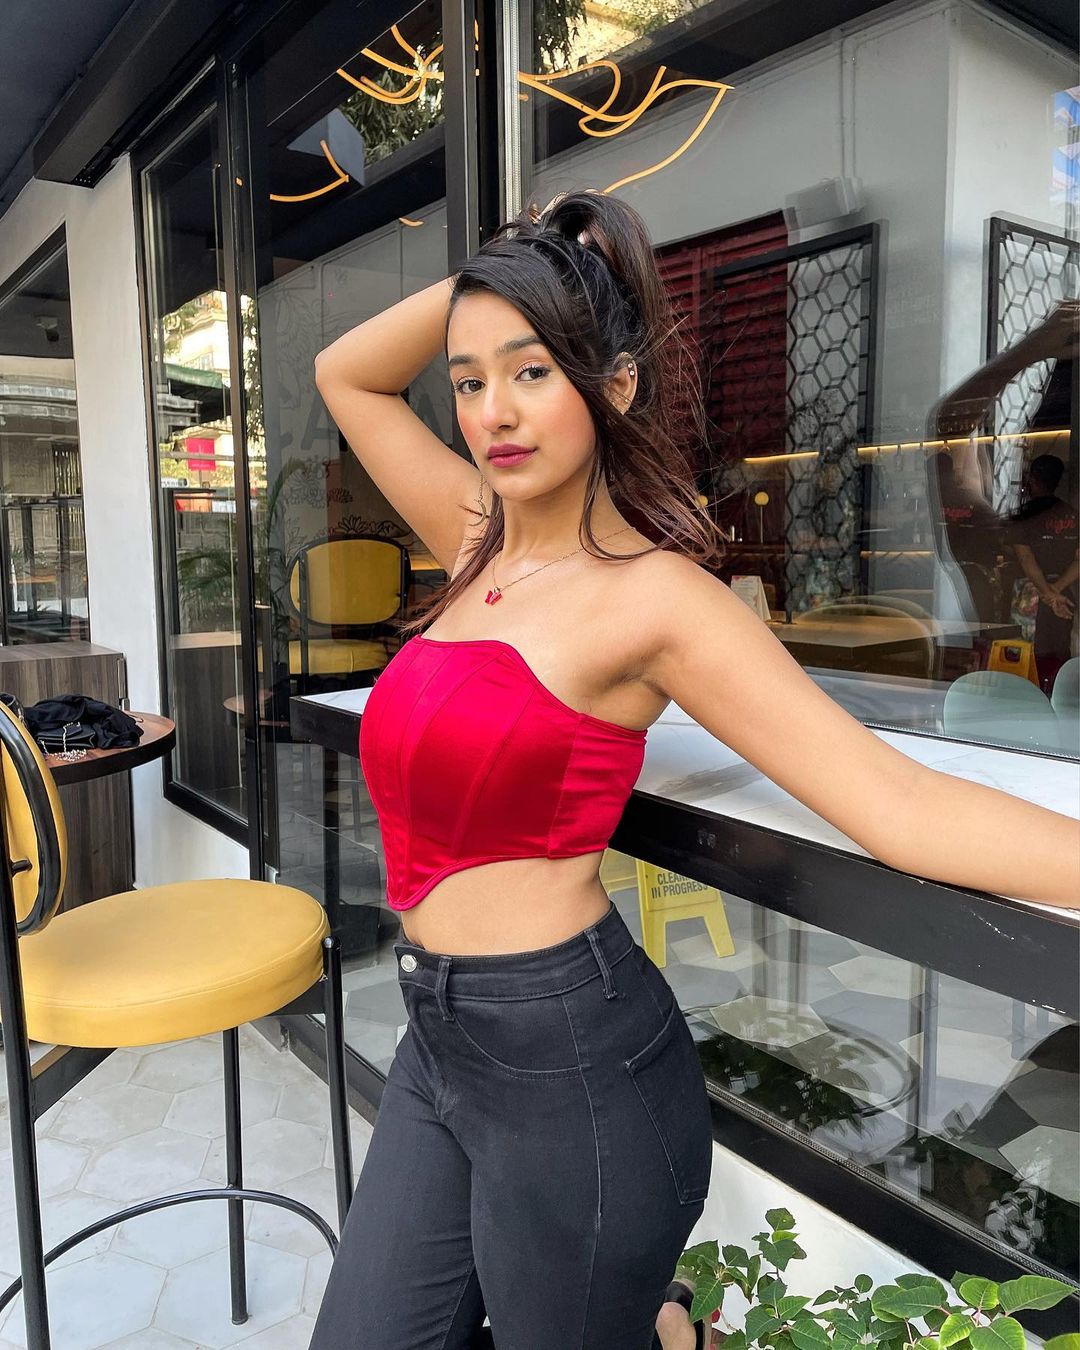 Biography of Shubhna Agarwal: A beautiful Fitness Model and Instagram Sensation